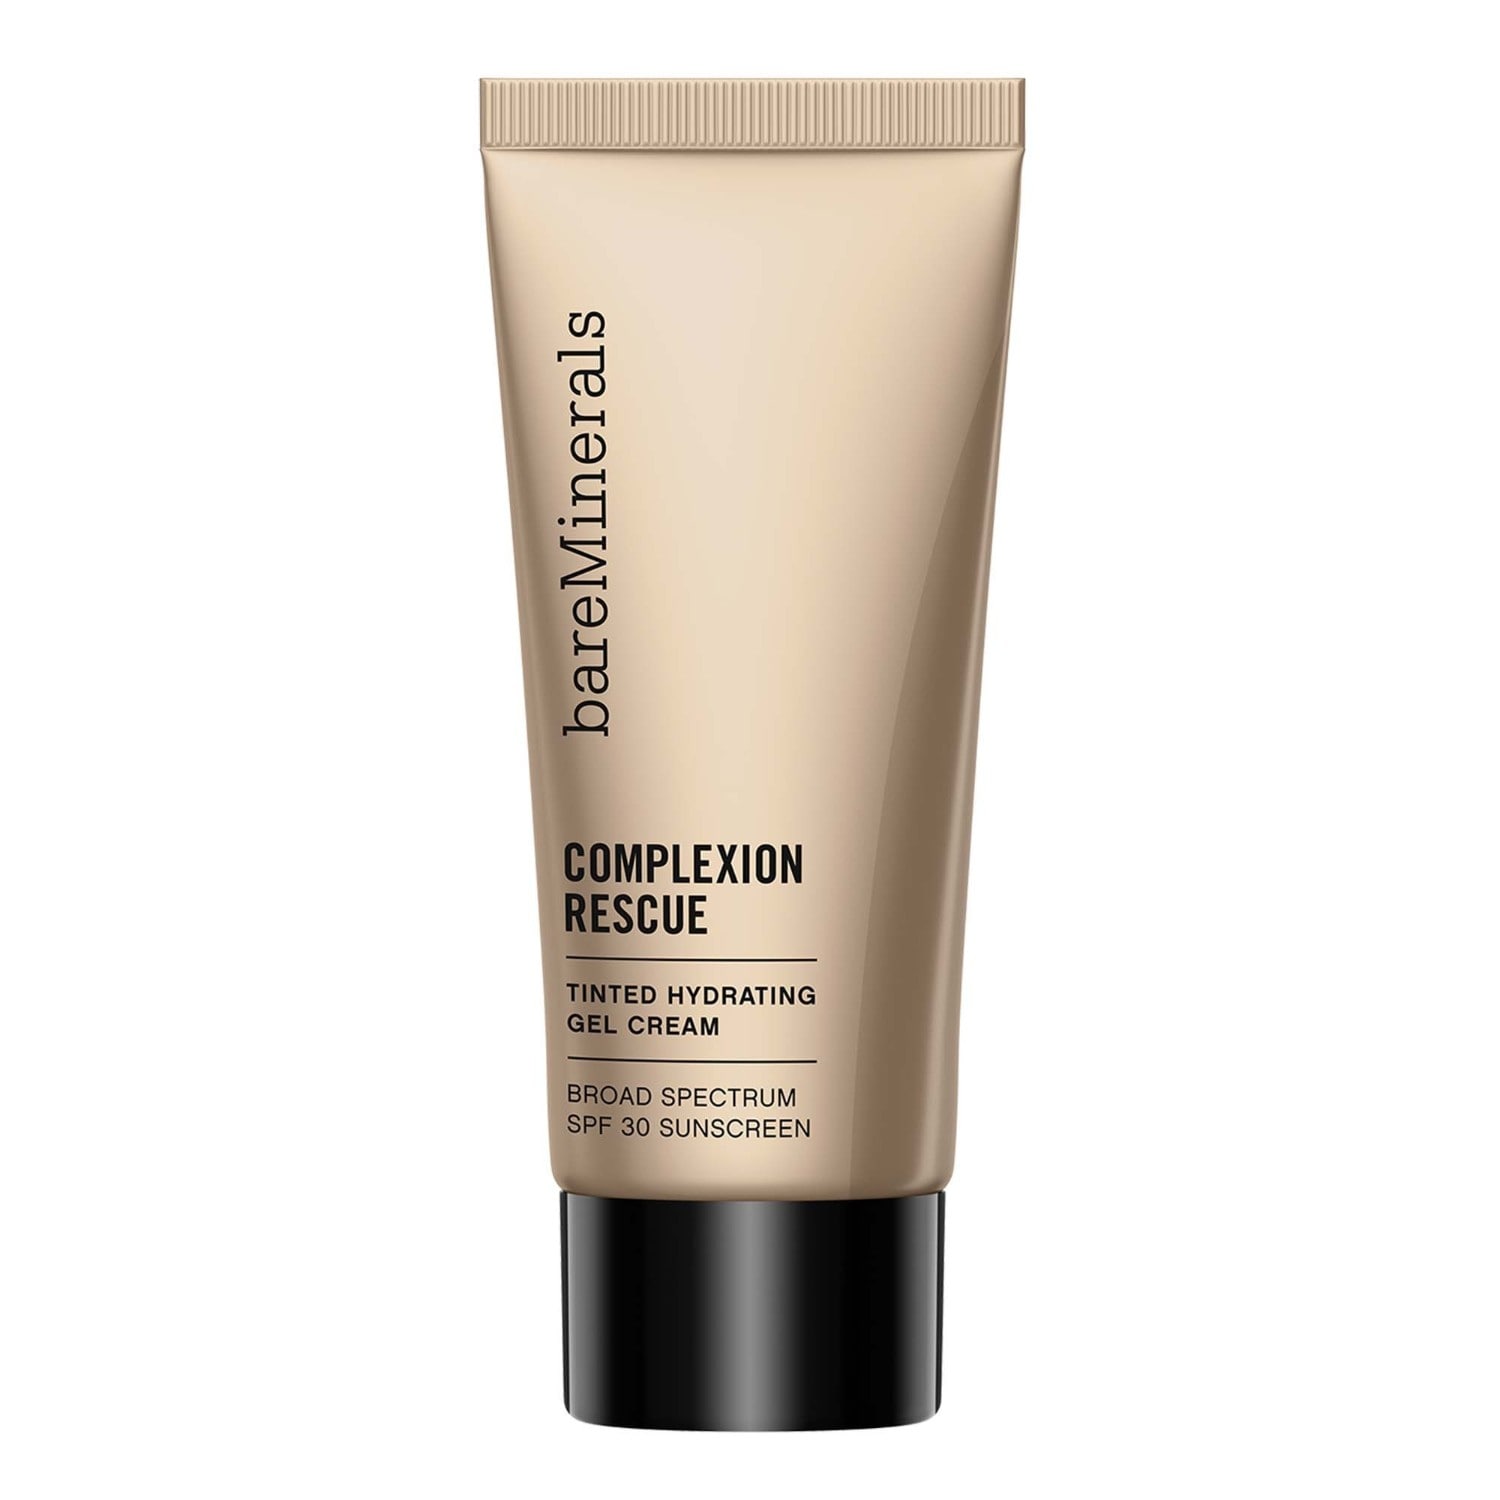 bareMinerals Complexion Rescue Tinted Hydrating Gel Cream - Travelsize, Vanilla